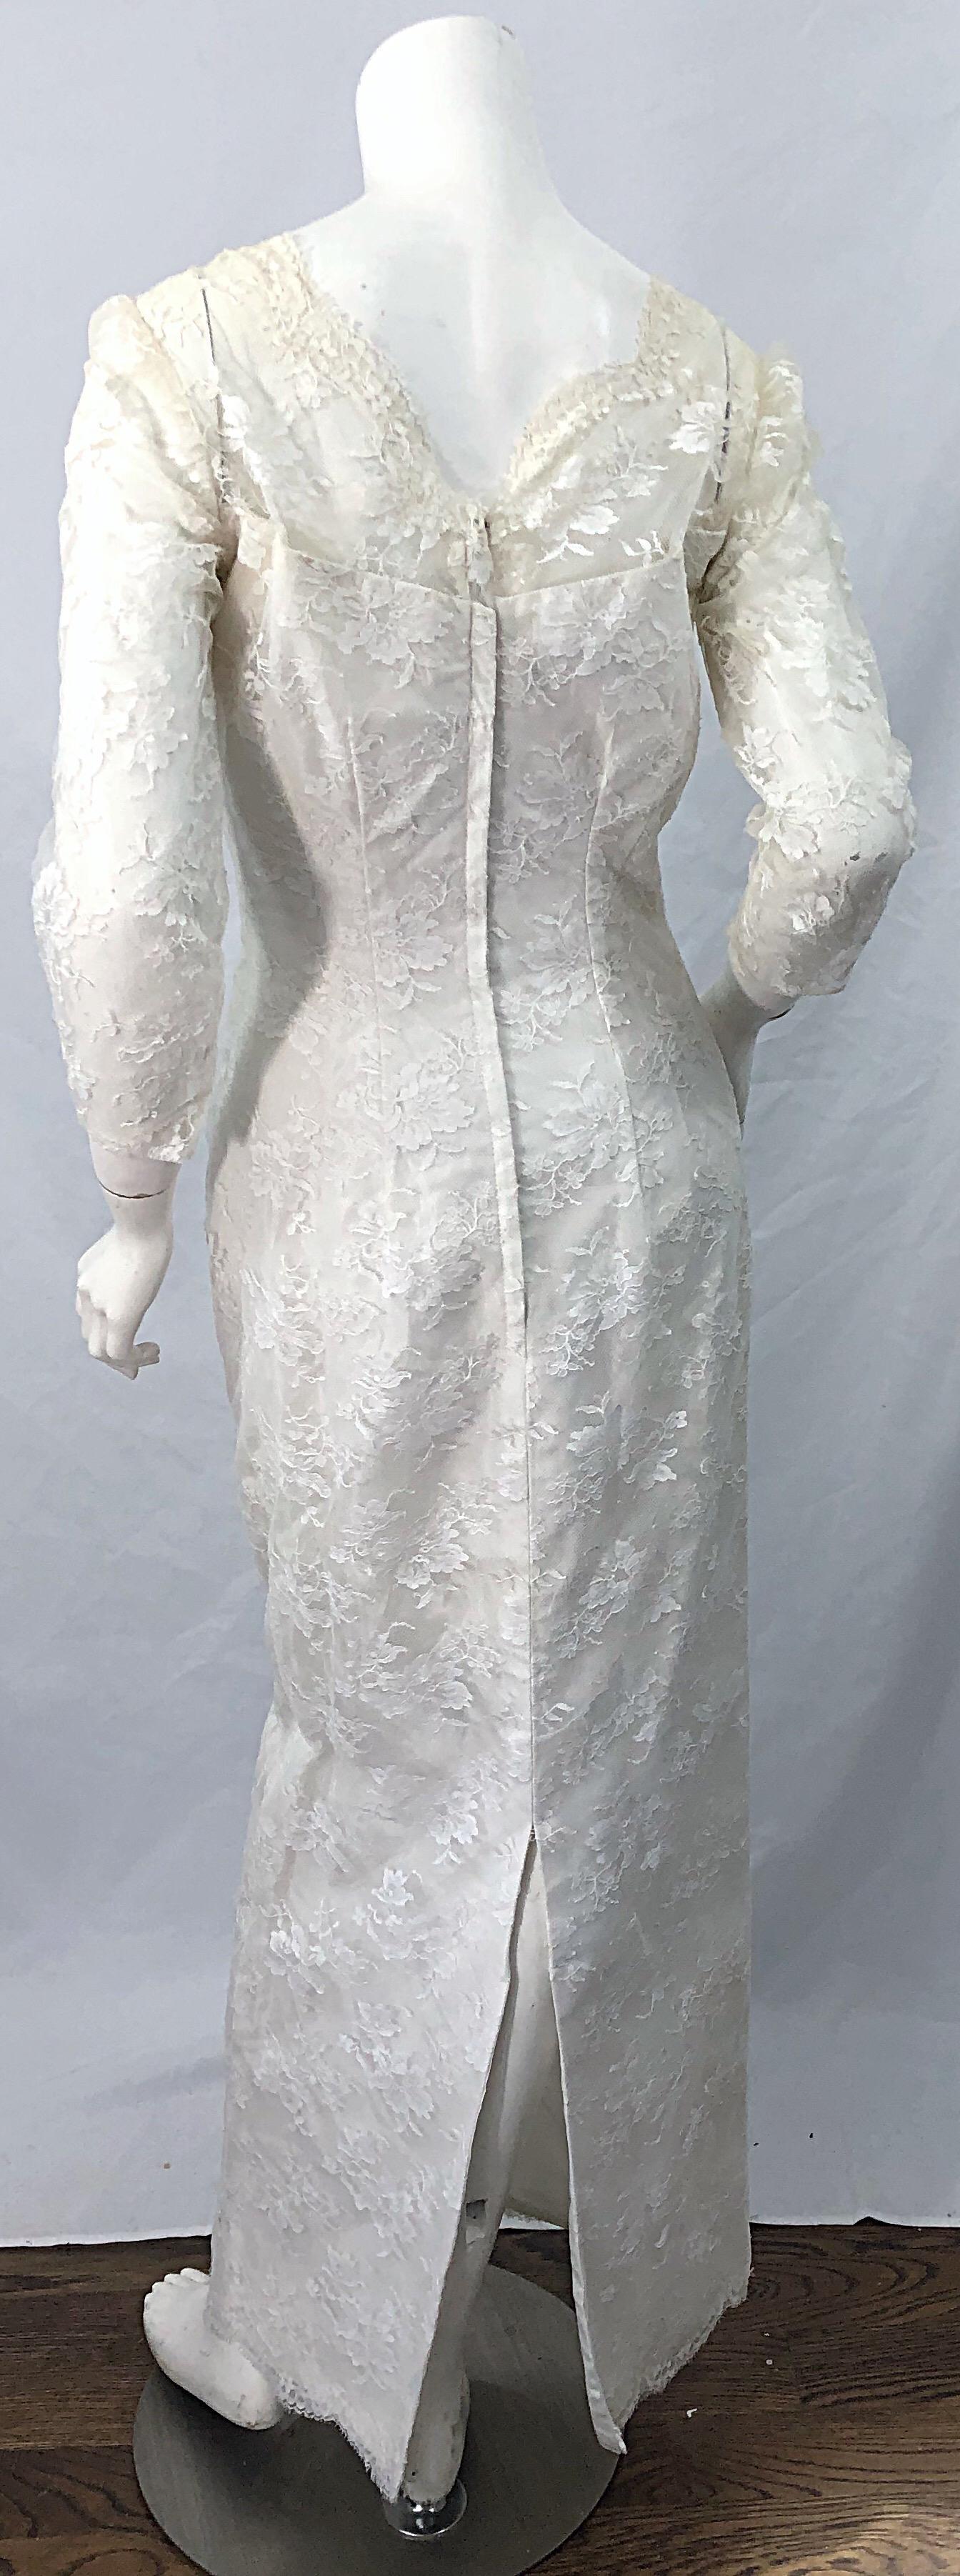 1960s An Original By Constantino White Beaded Couture Vintage Wedding Dress Gown For Sale 4